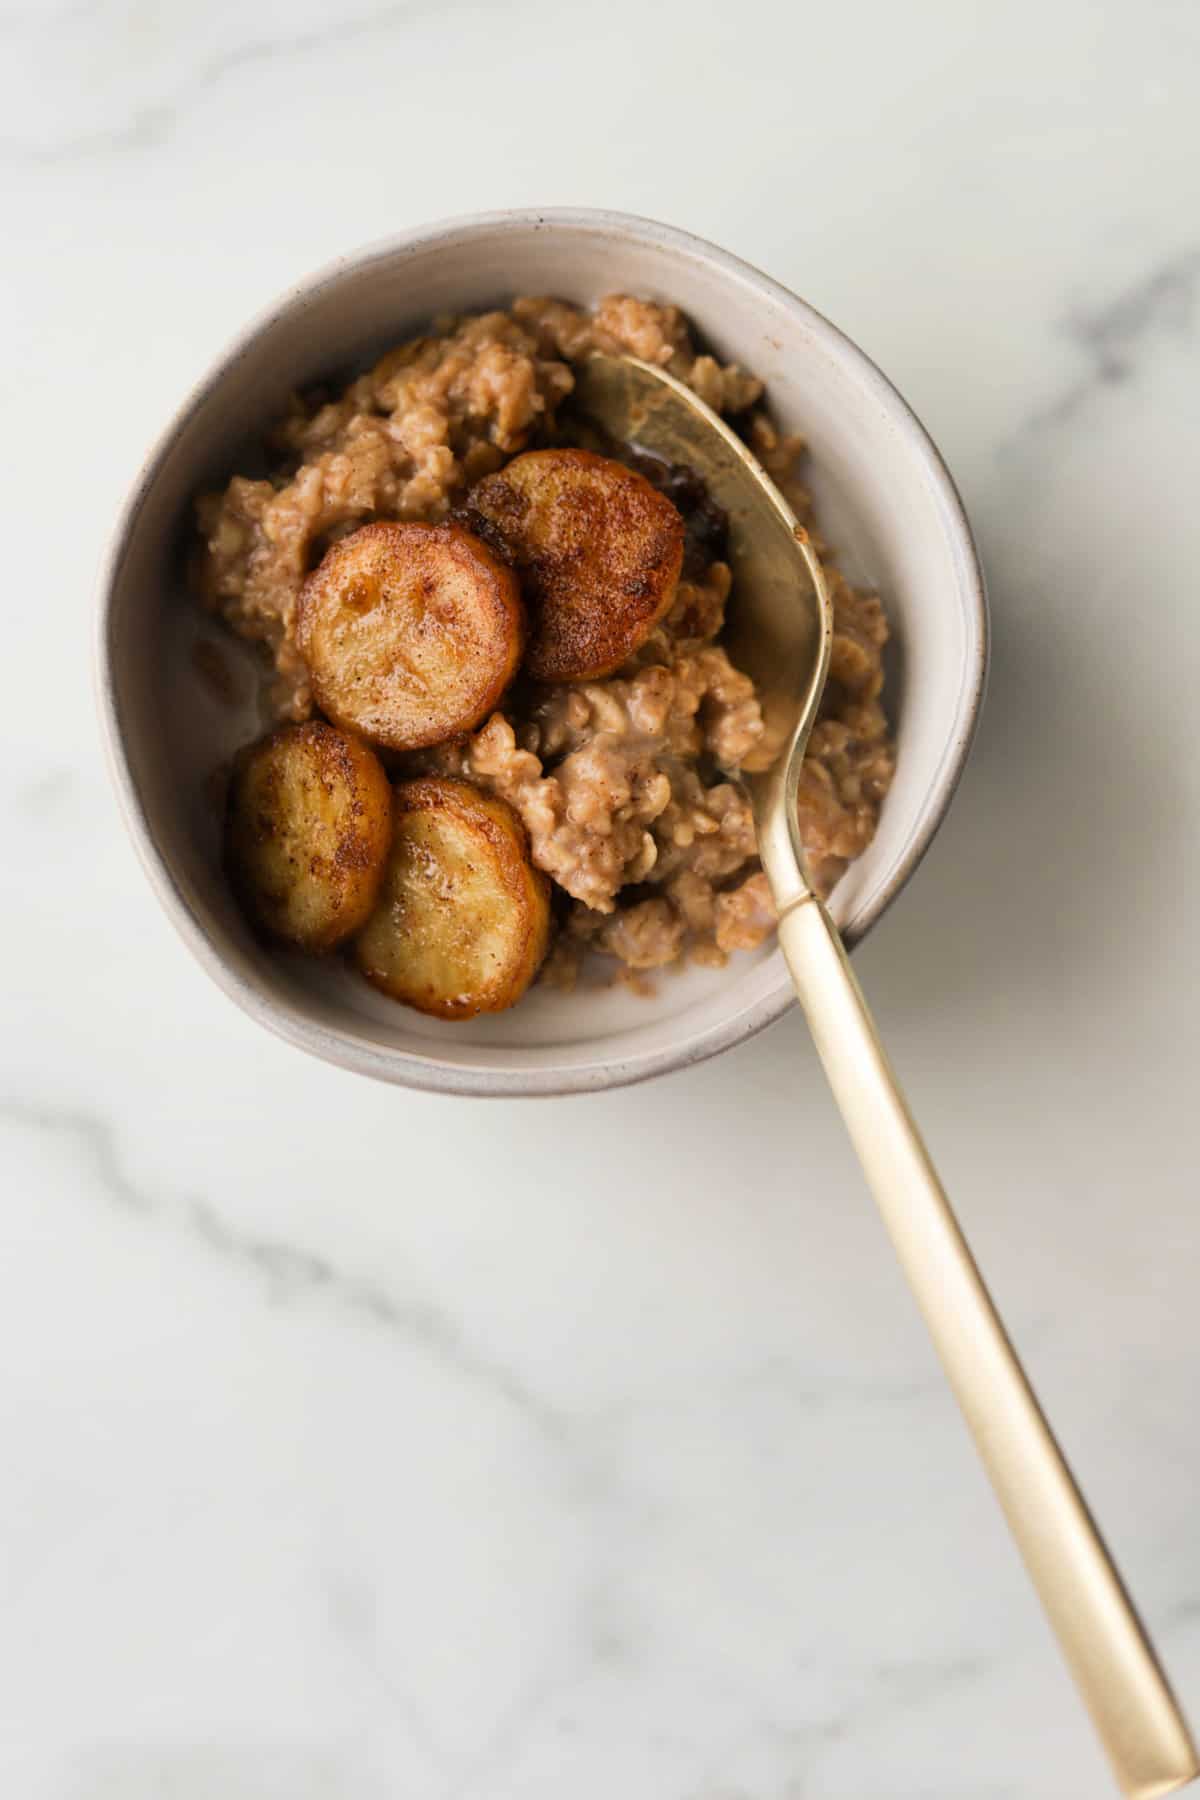 An overhead shot of a bowl of peanut butter oatmeal with caramelized bananas on top.